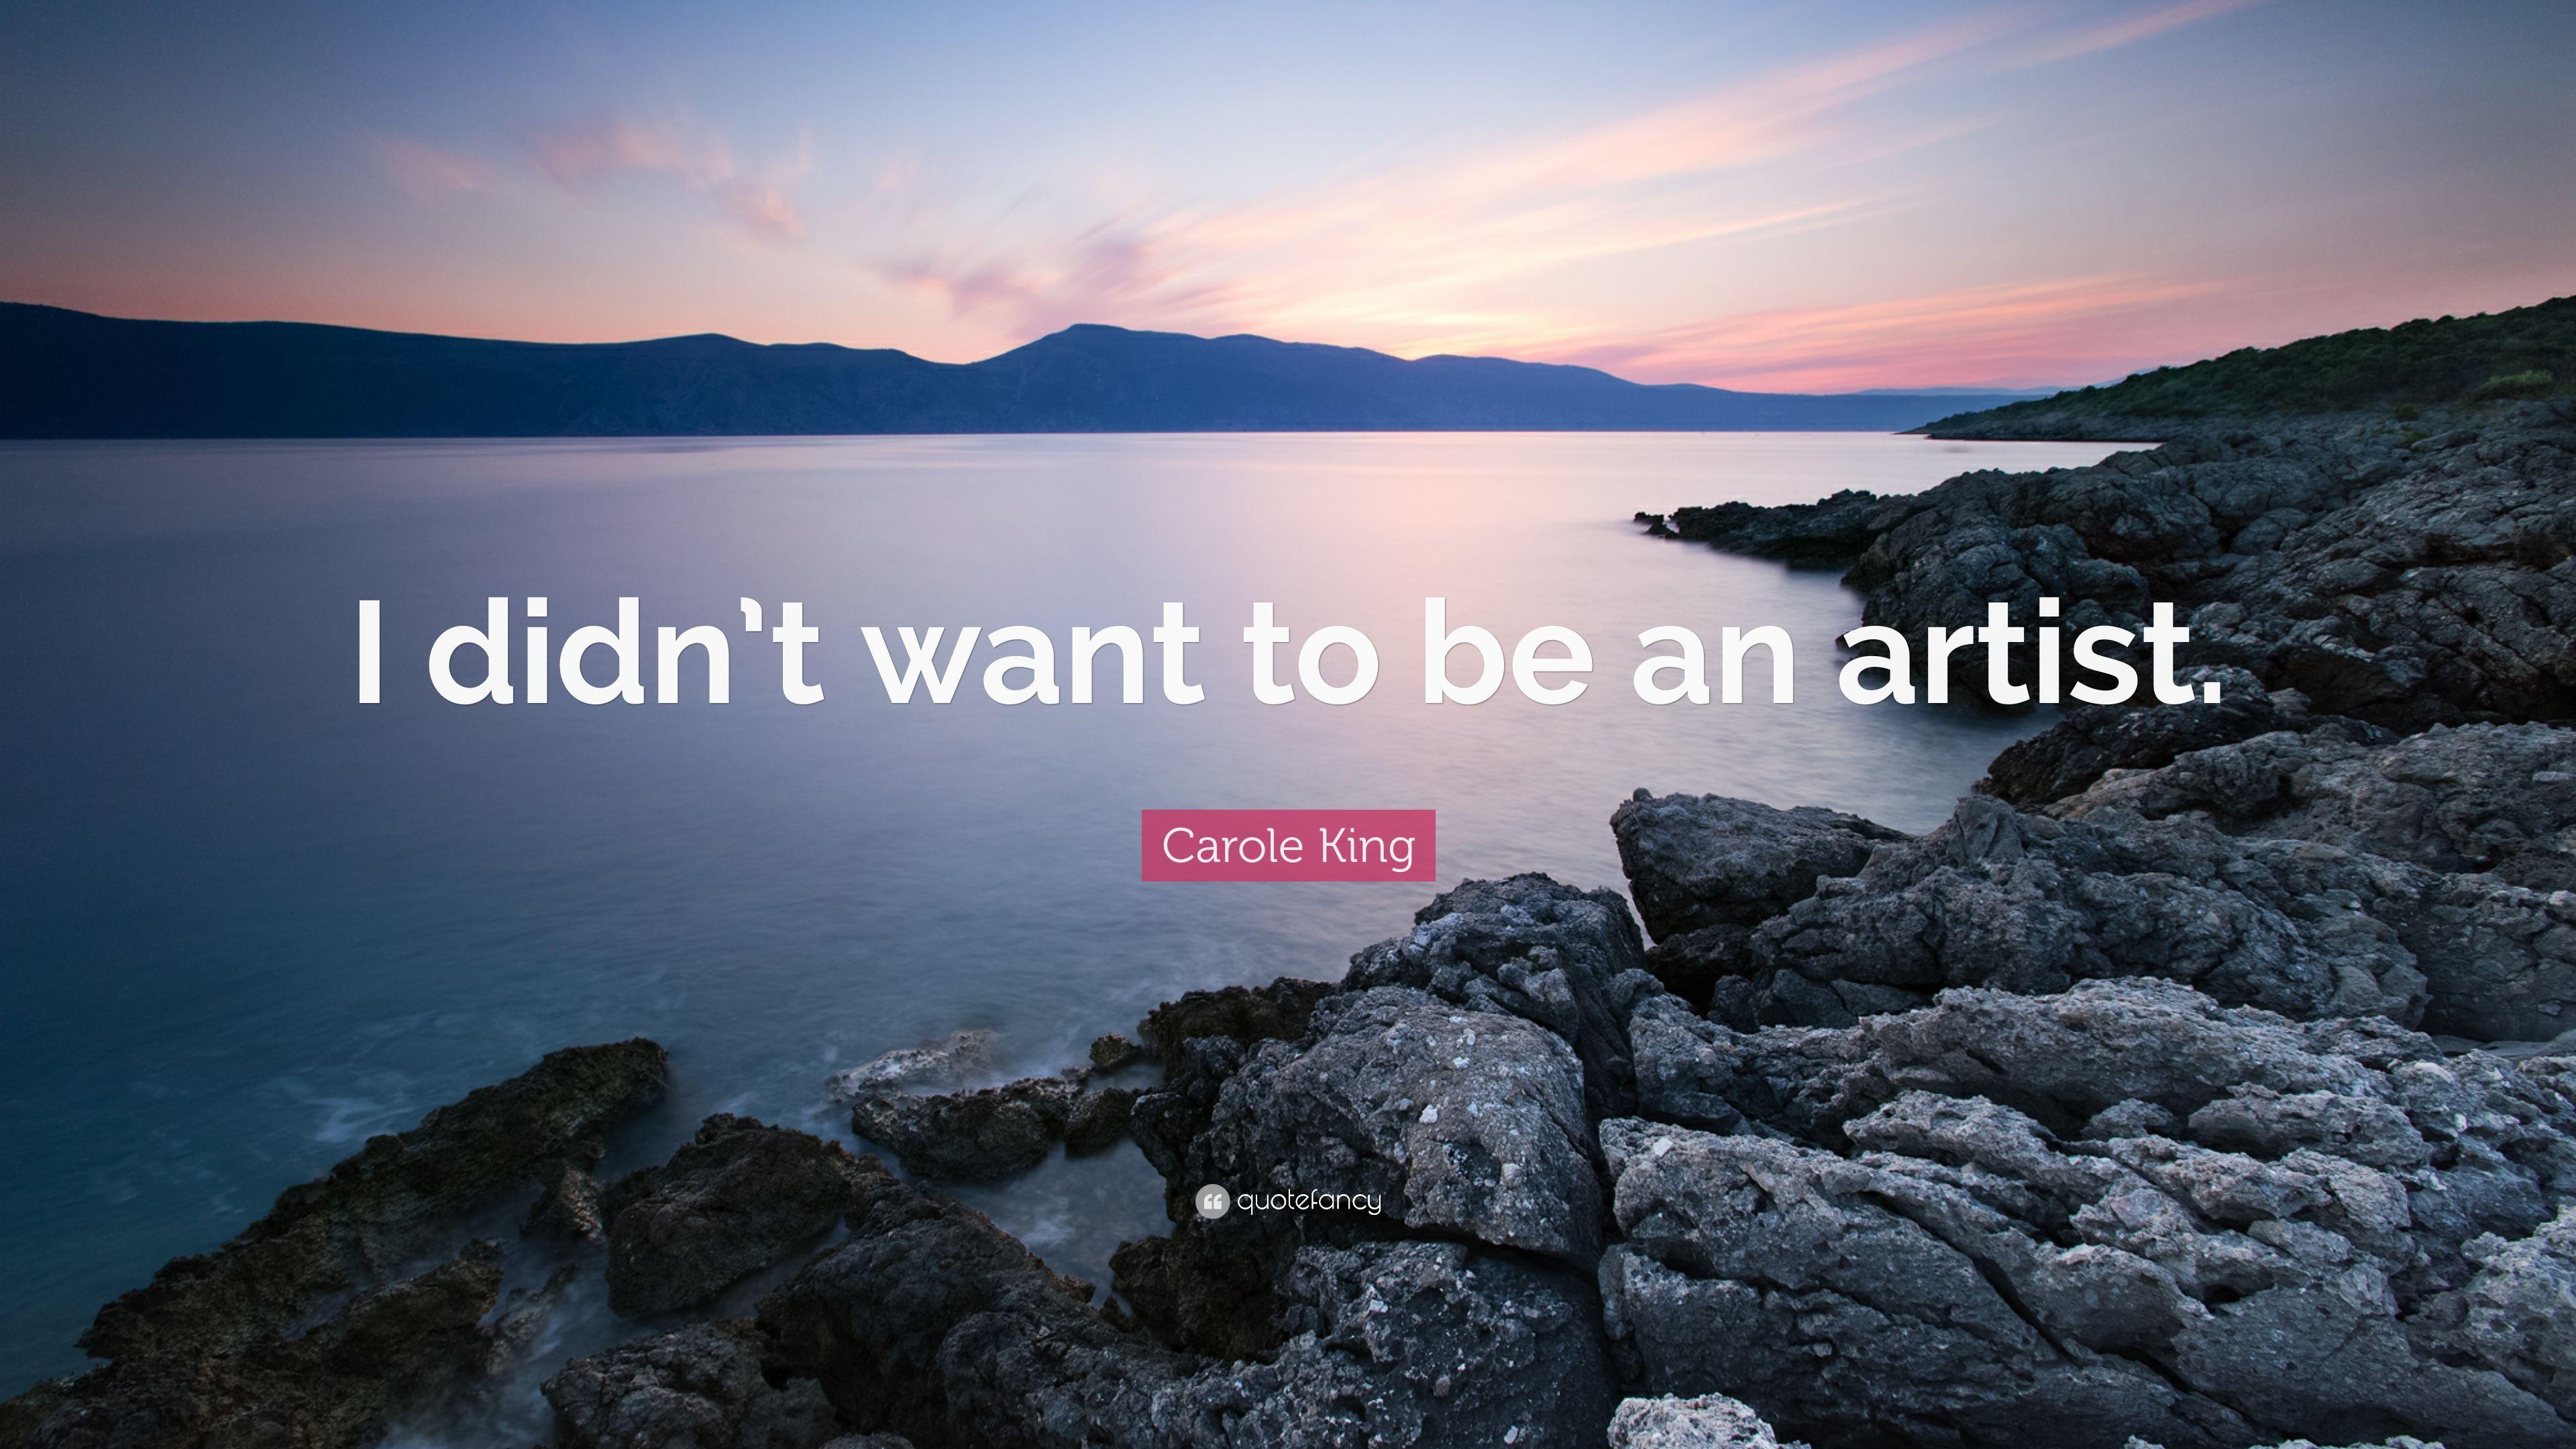 Carole King Quote: “I didn't want to be an artist.” 7 wallpaper